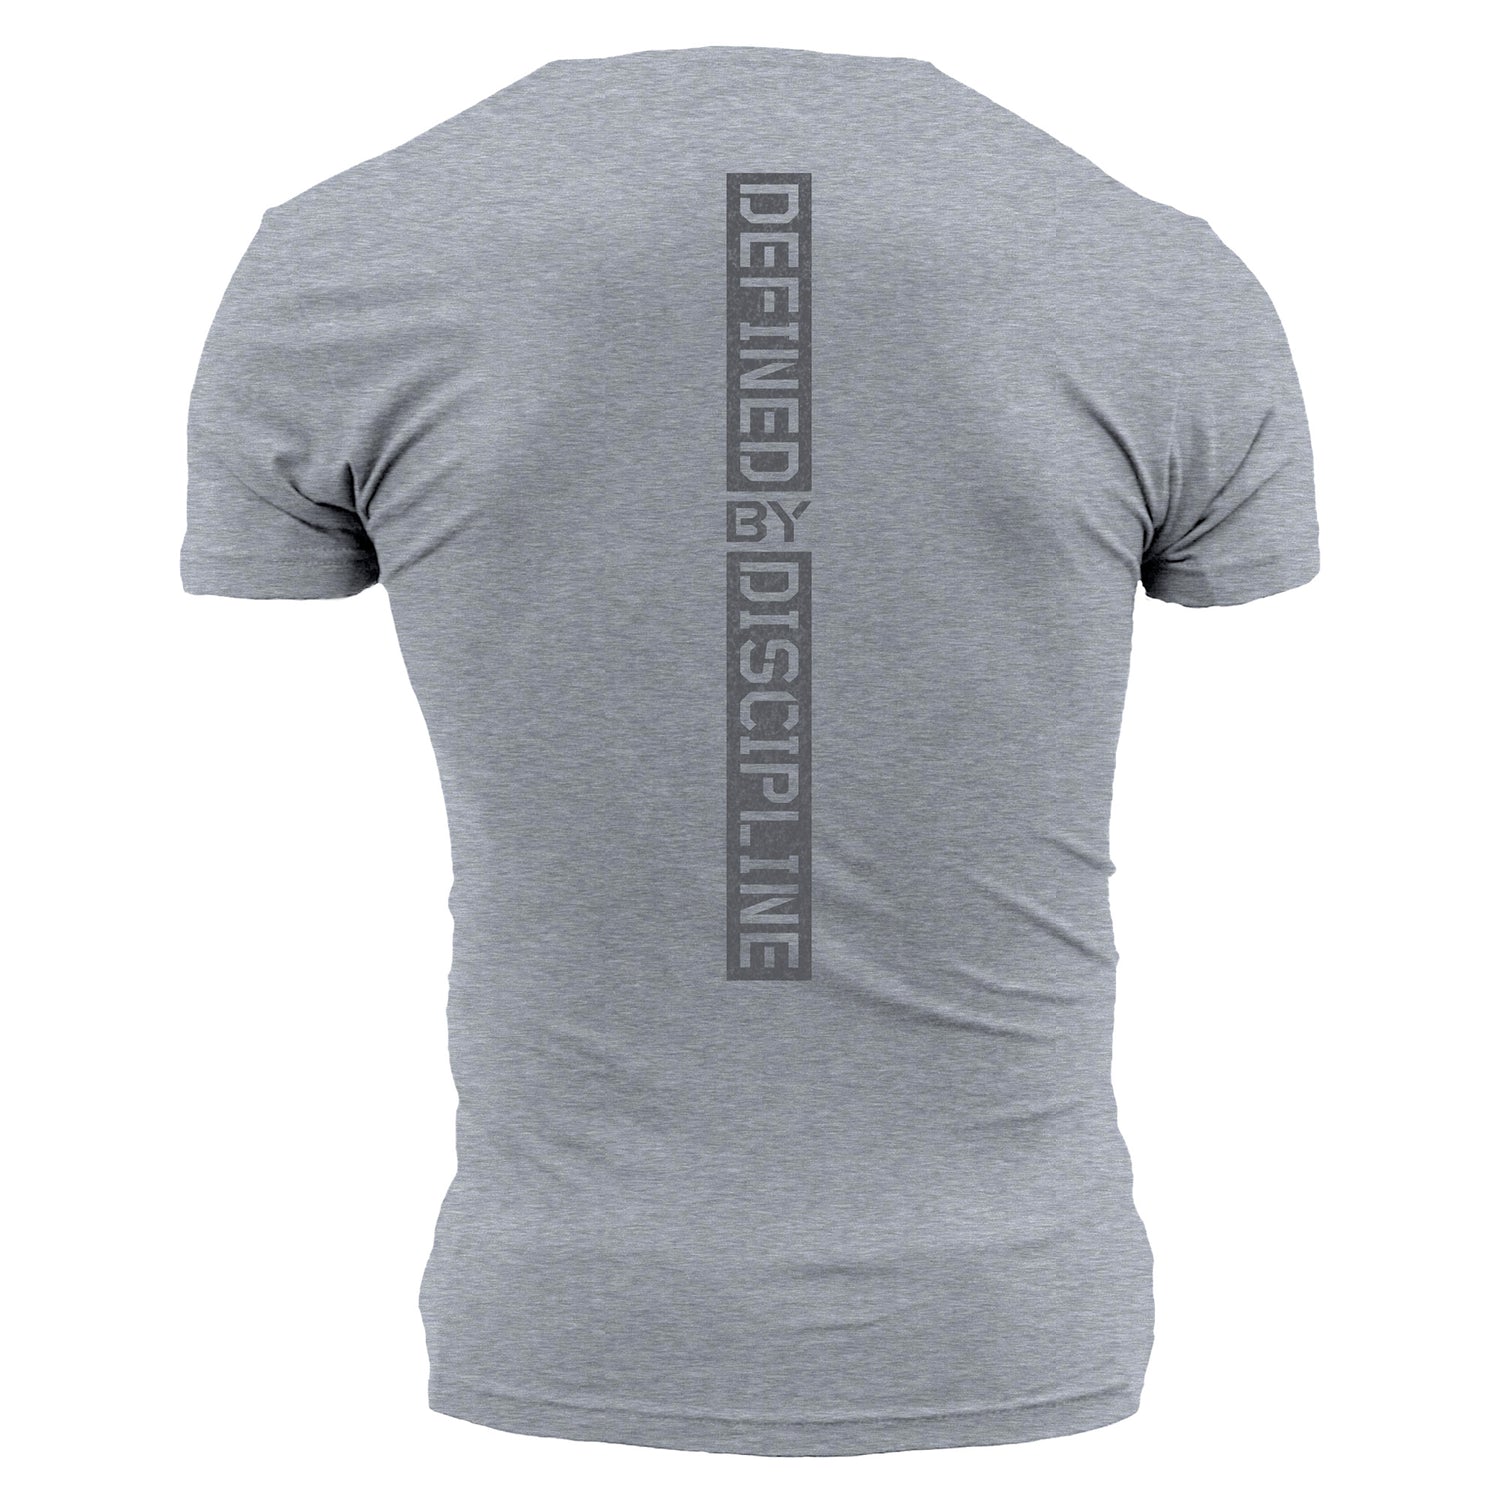 Defined by Discipline Shirt | Grunt Style